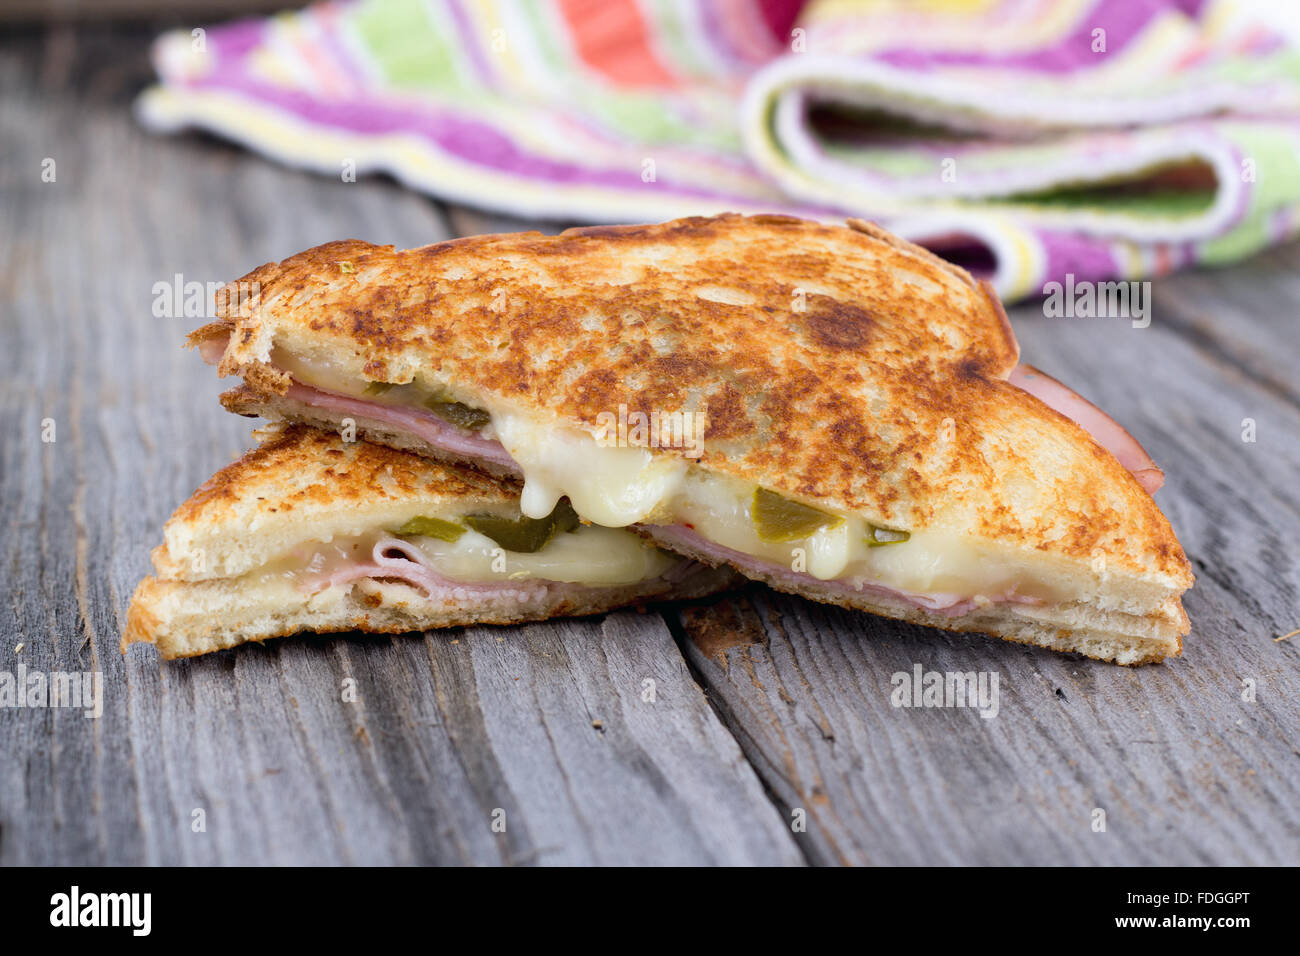 ham and cheese sandwich on rustic wooden table Stock Photo